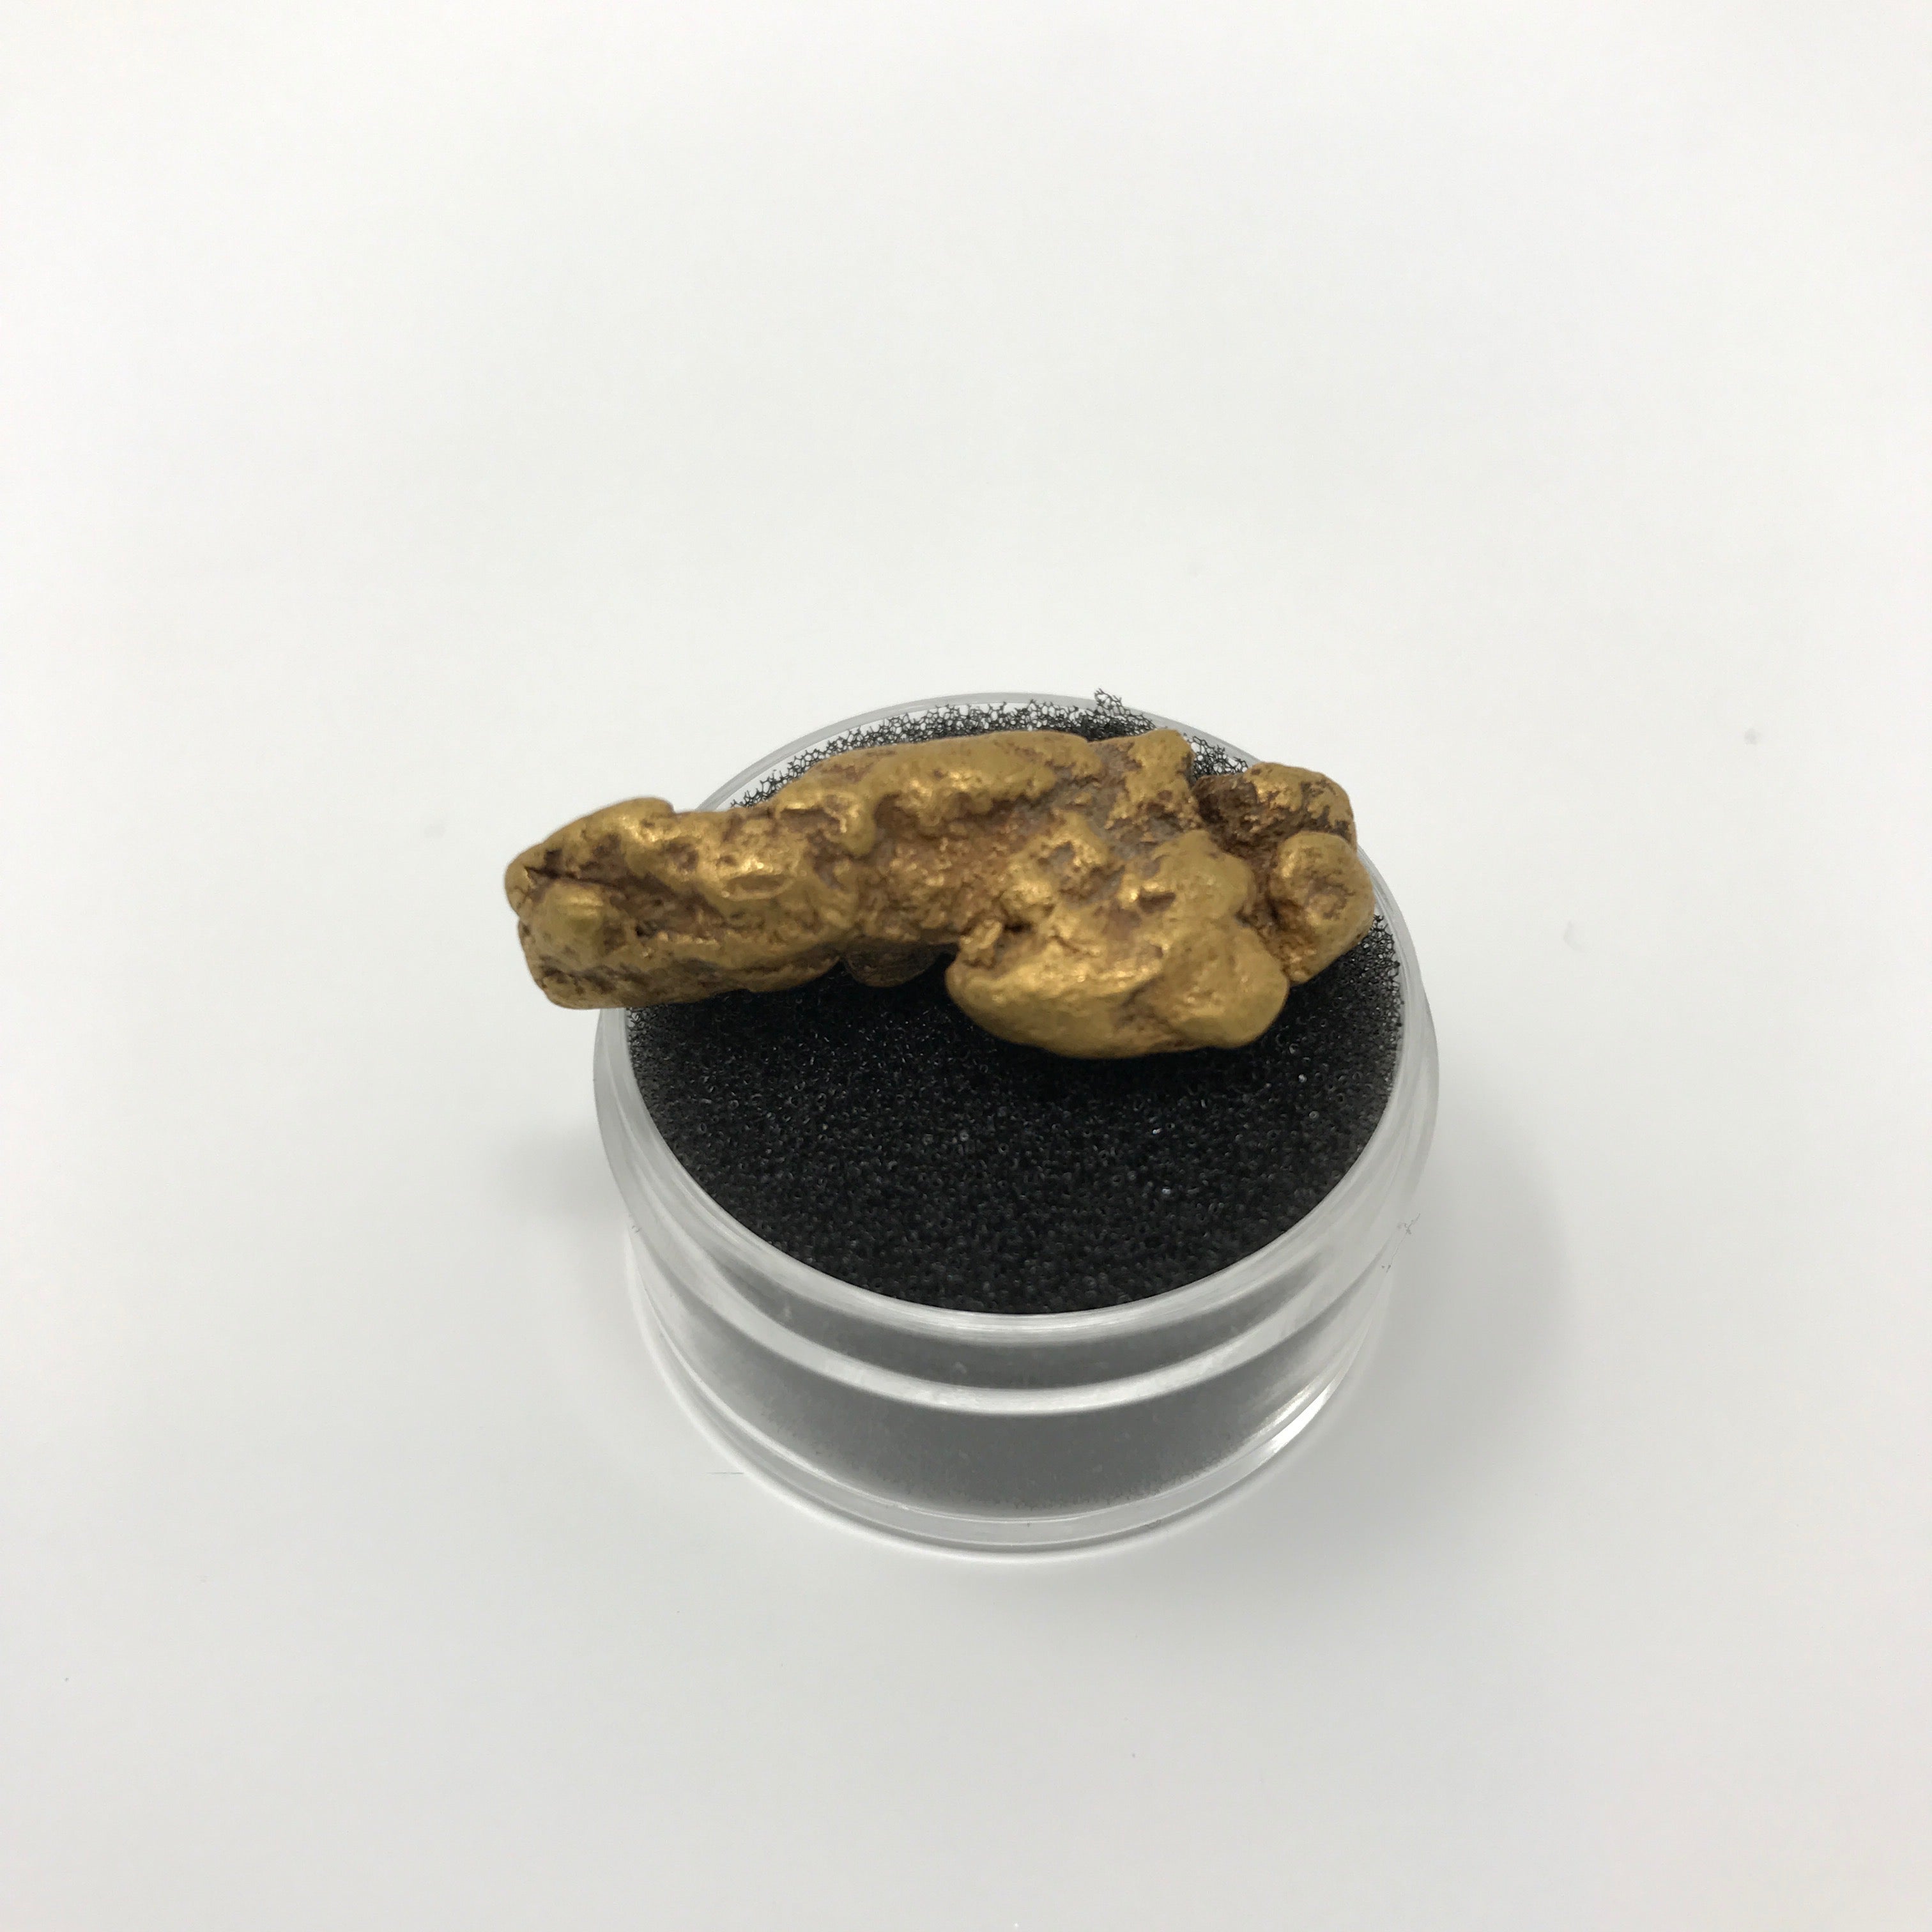 ATOMIC GOLD NUGGET - GOLD PAYDIRT